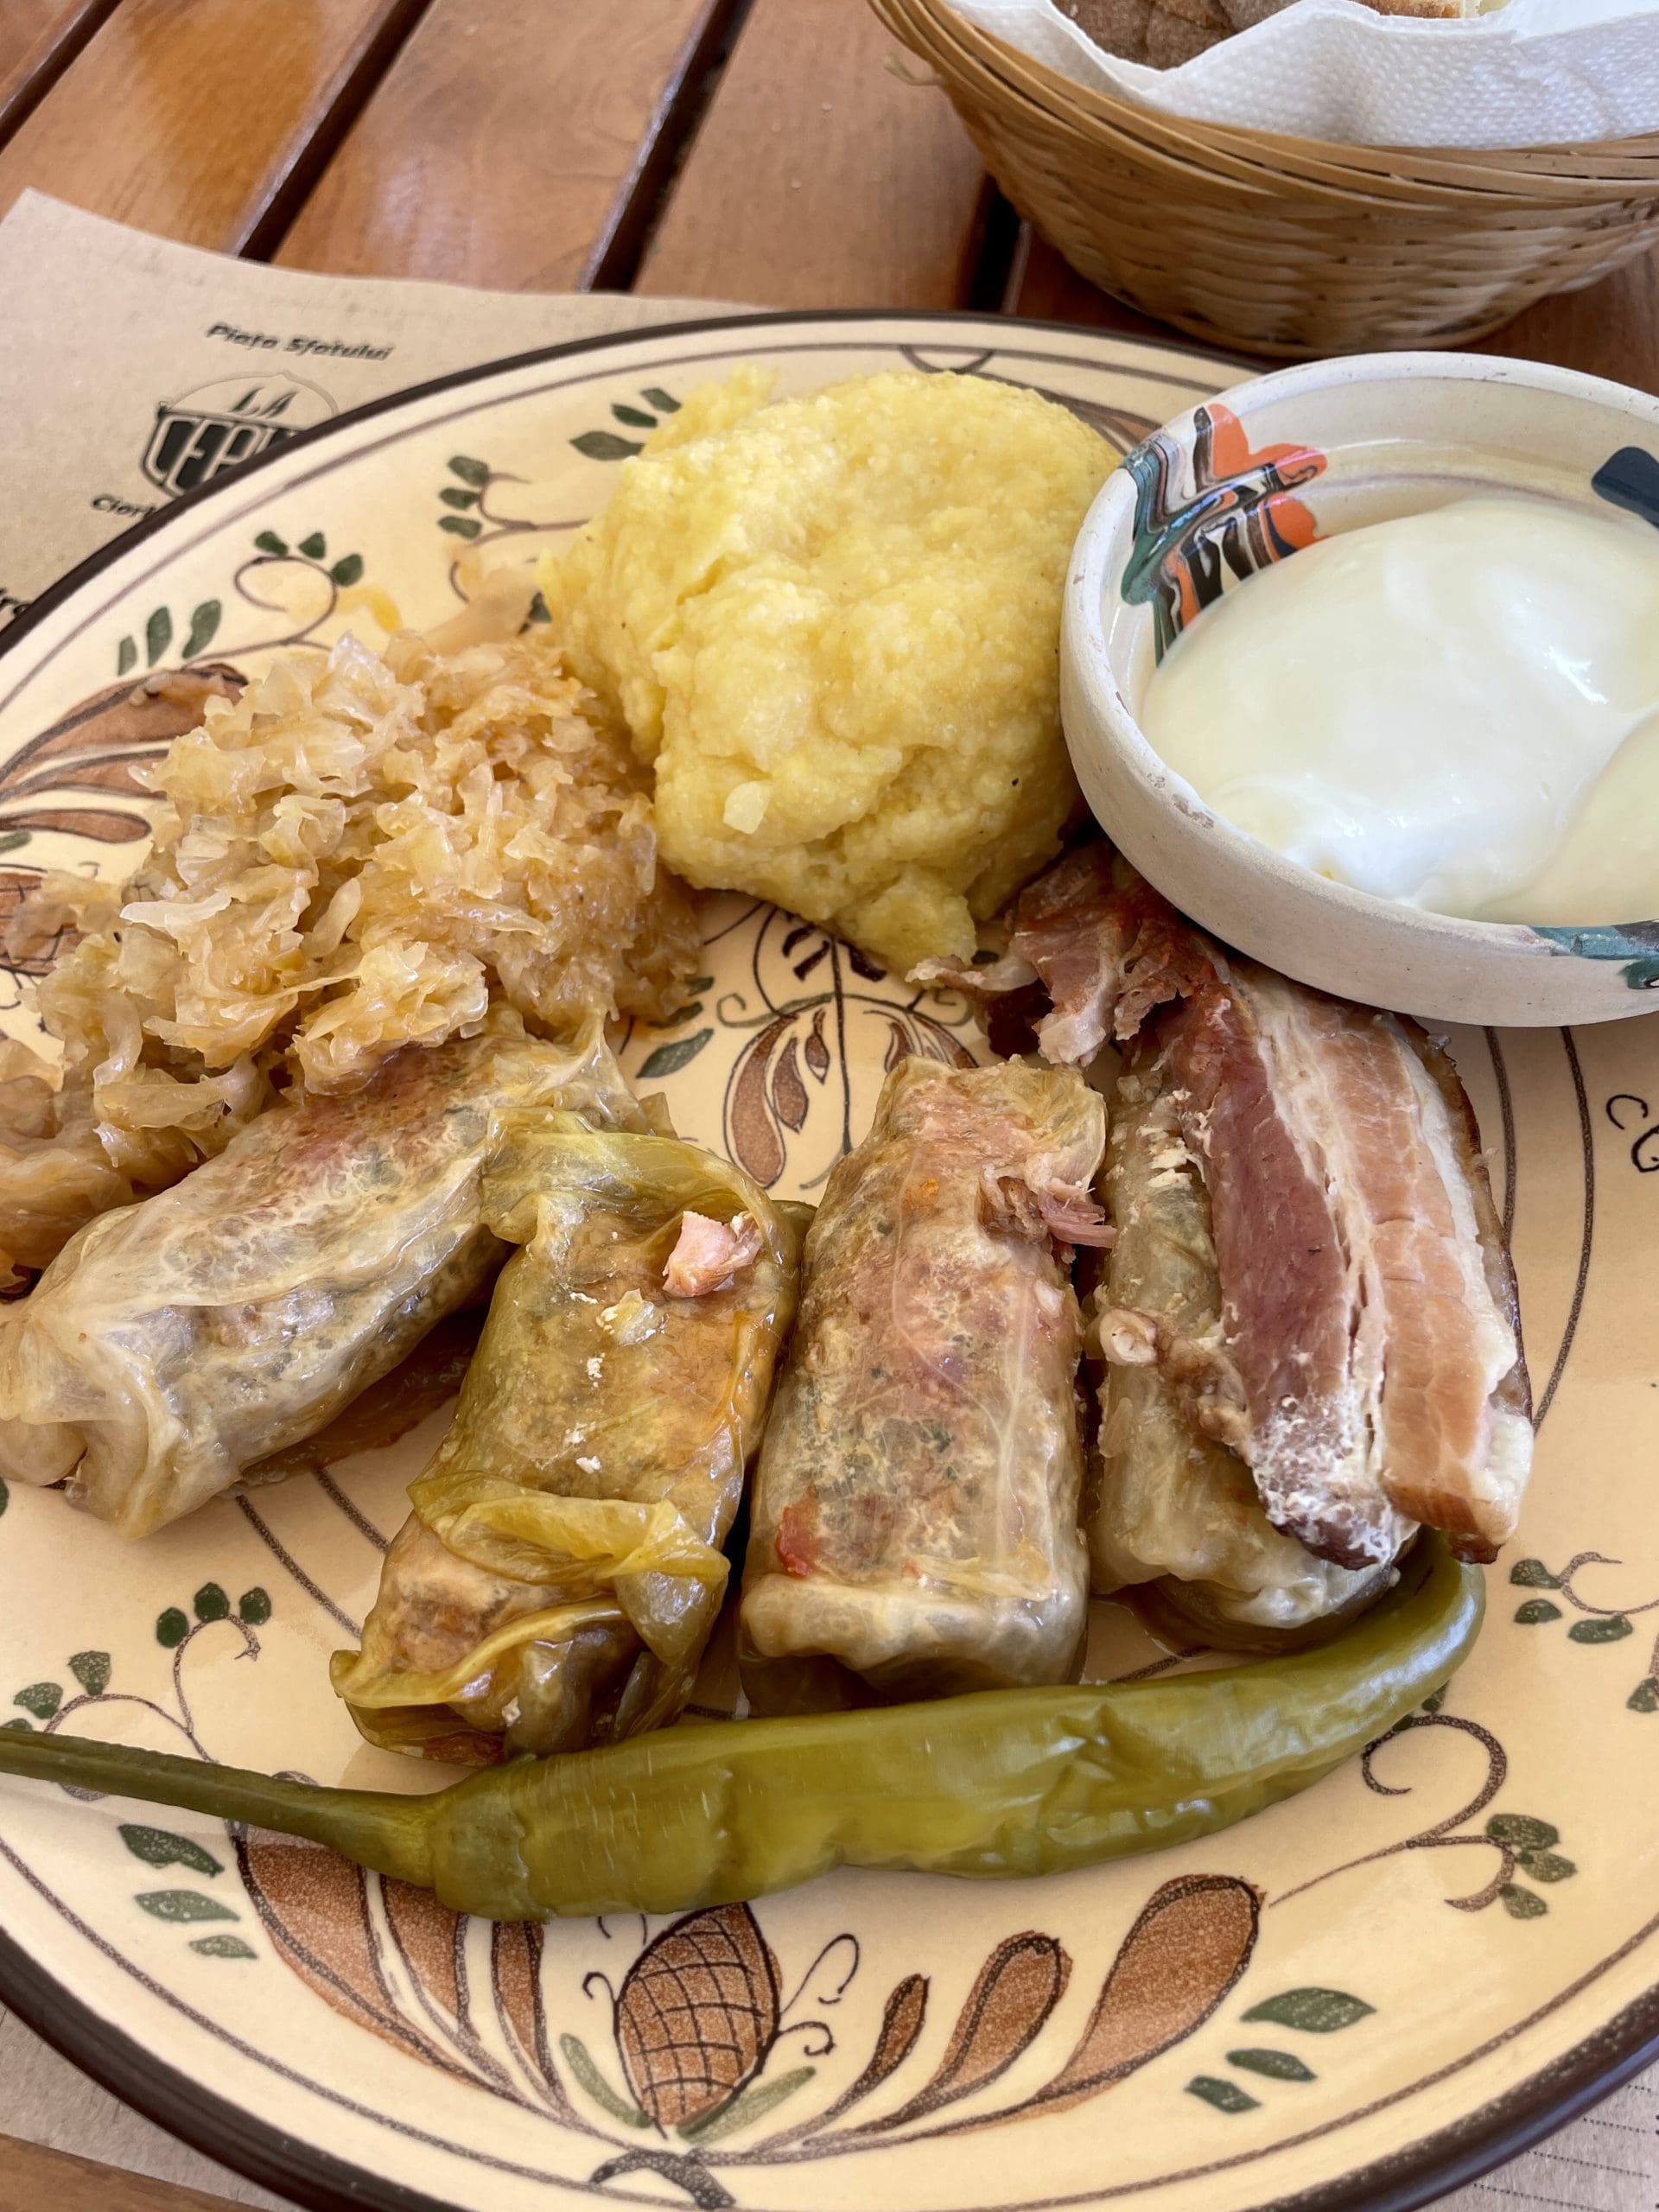 cabbage rolls and other items on plate